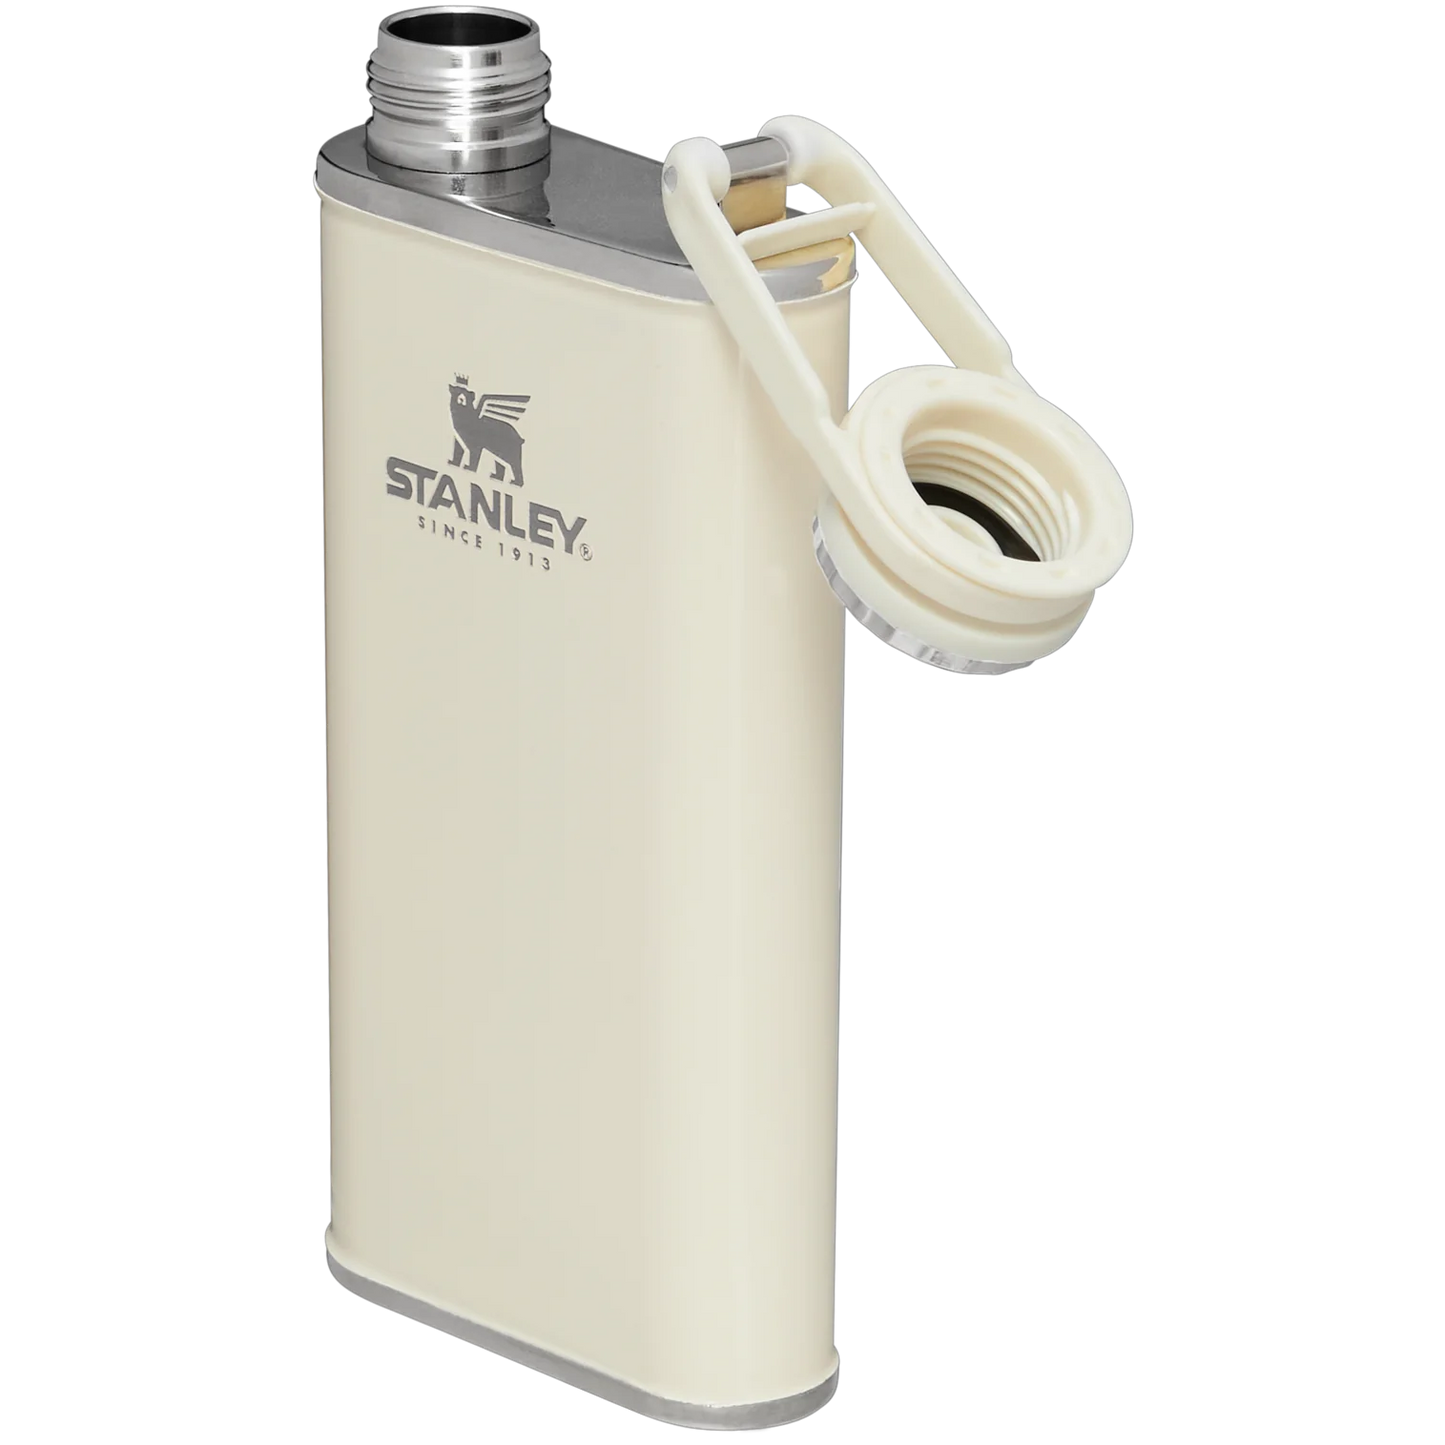 THE EASY FILL FLASK